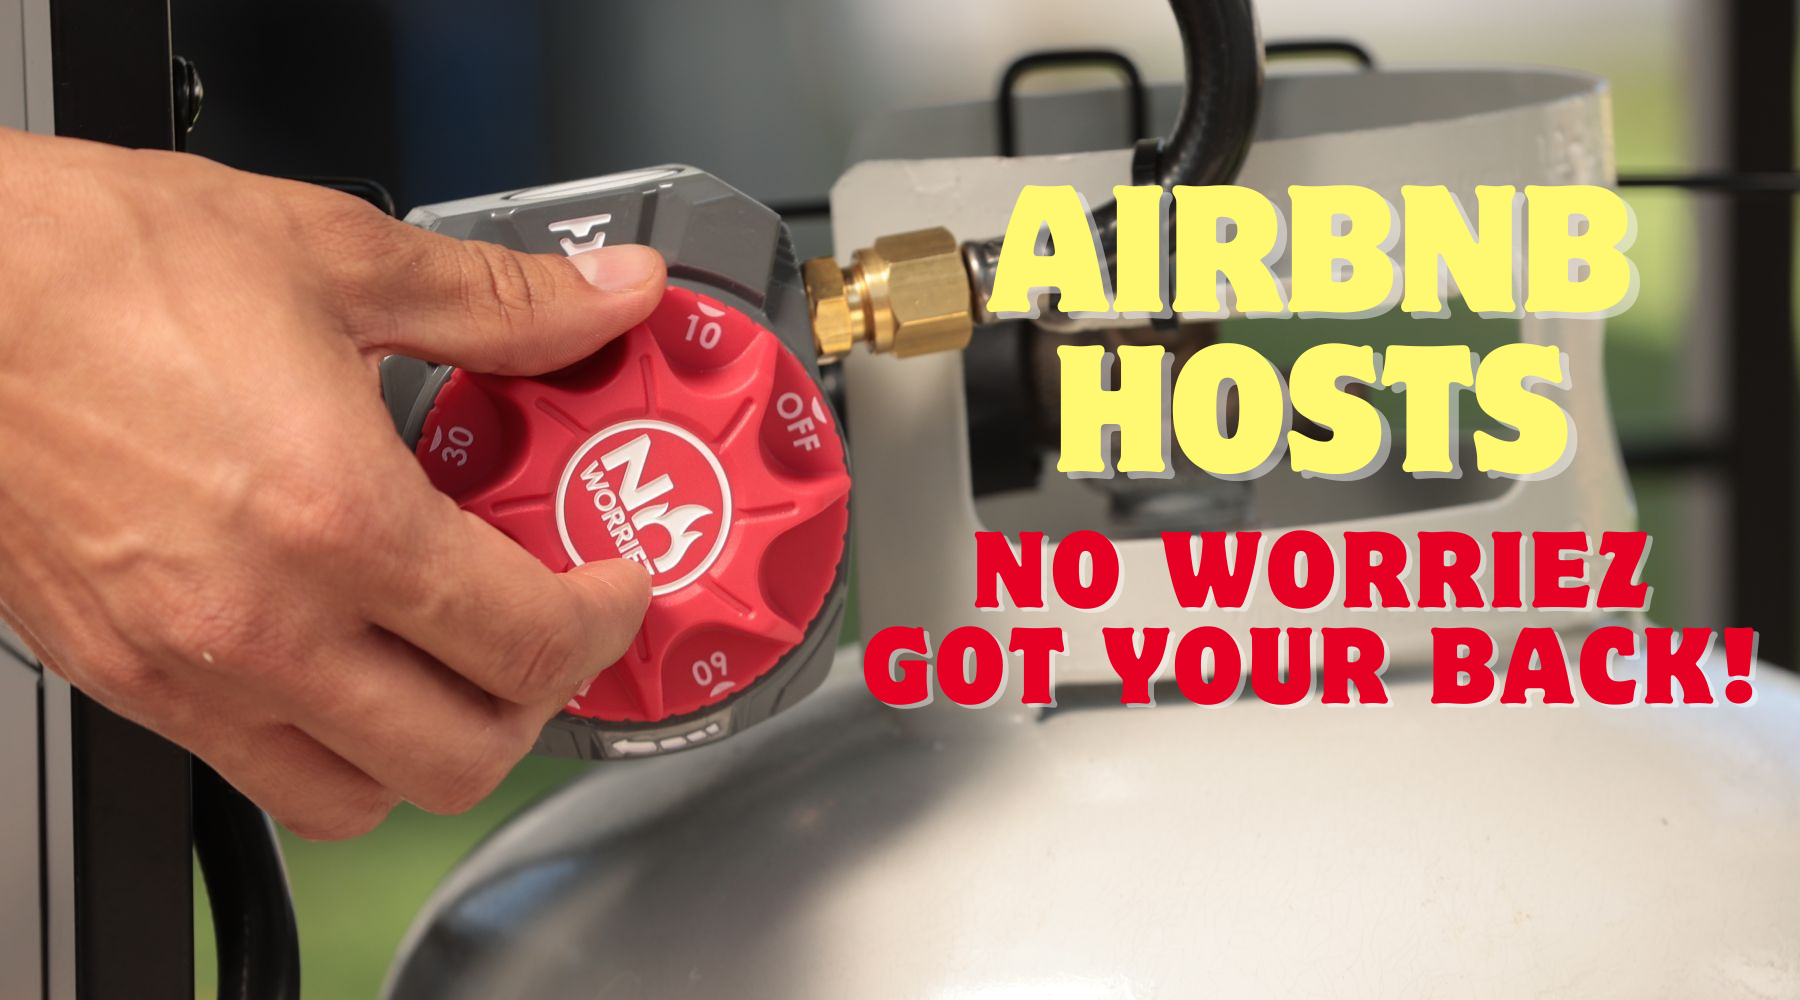 No Worriez gas timer for Airbnb hosts managing use